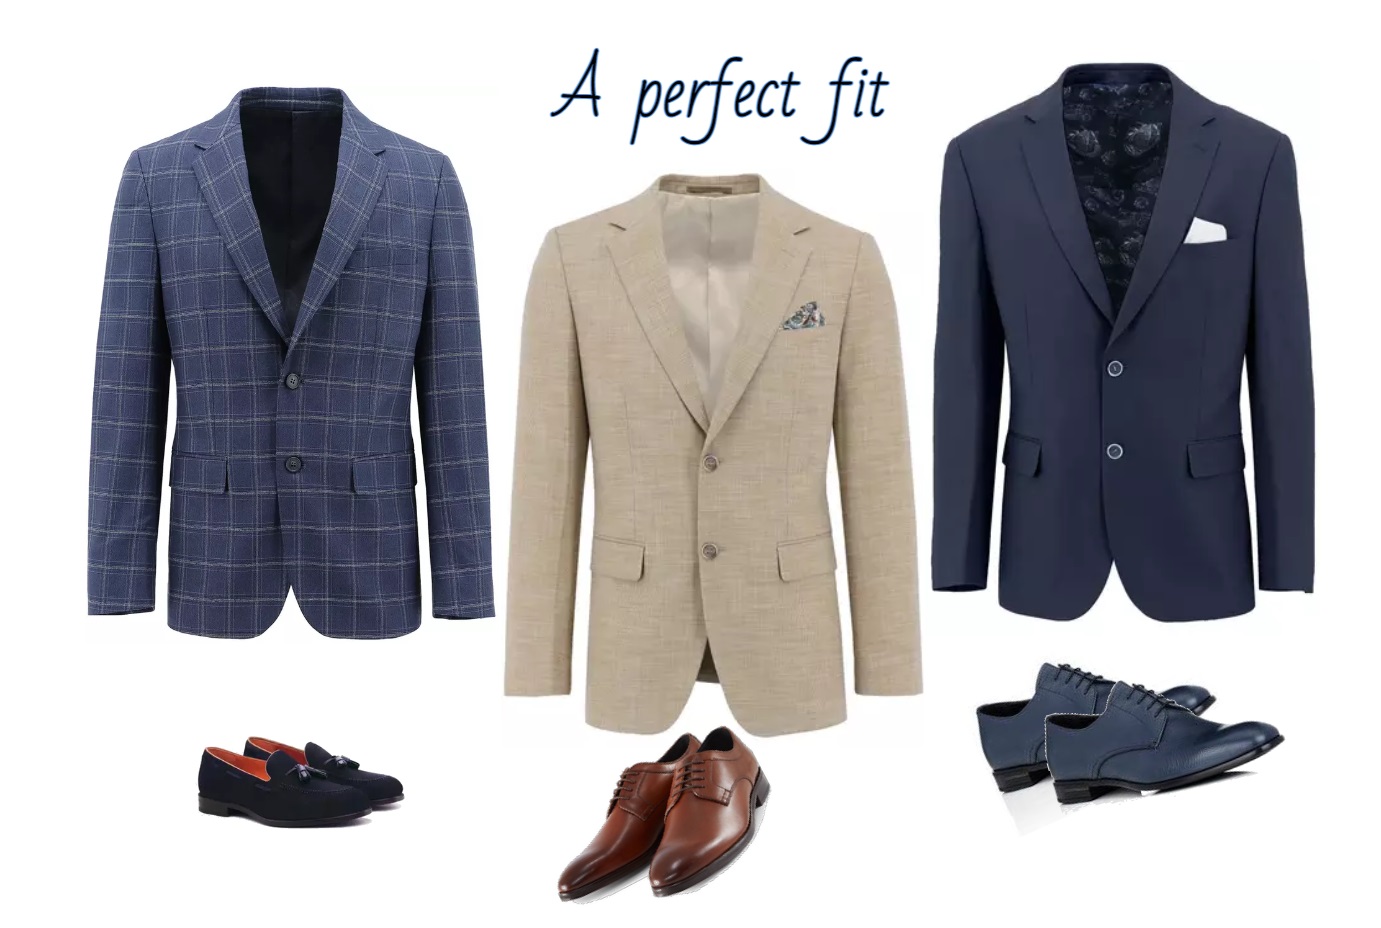 Tips for Selecting a Suit